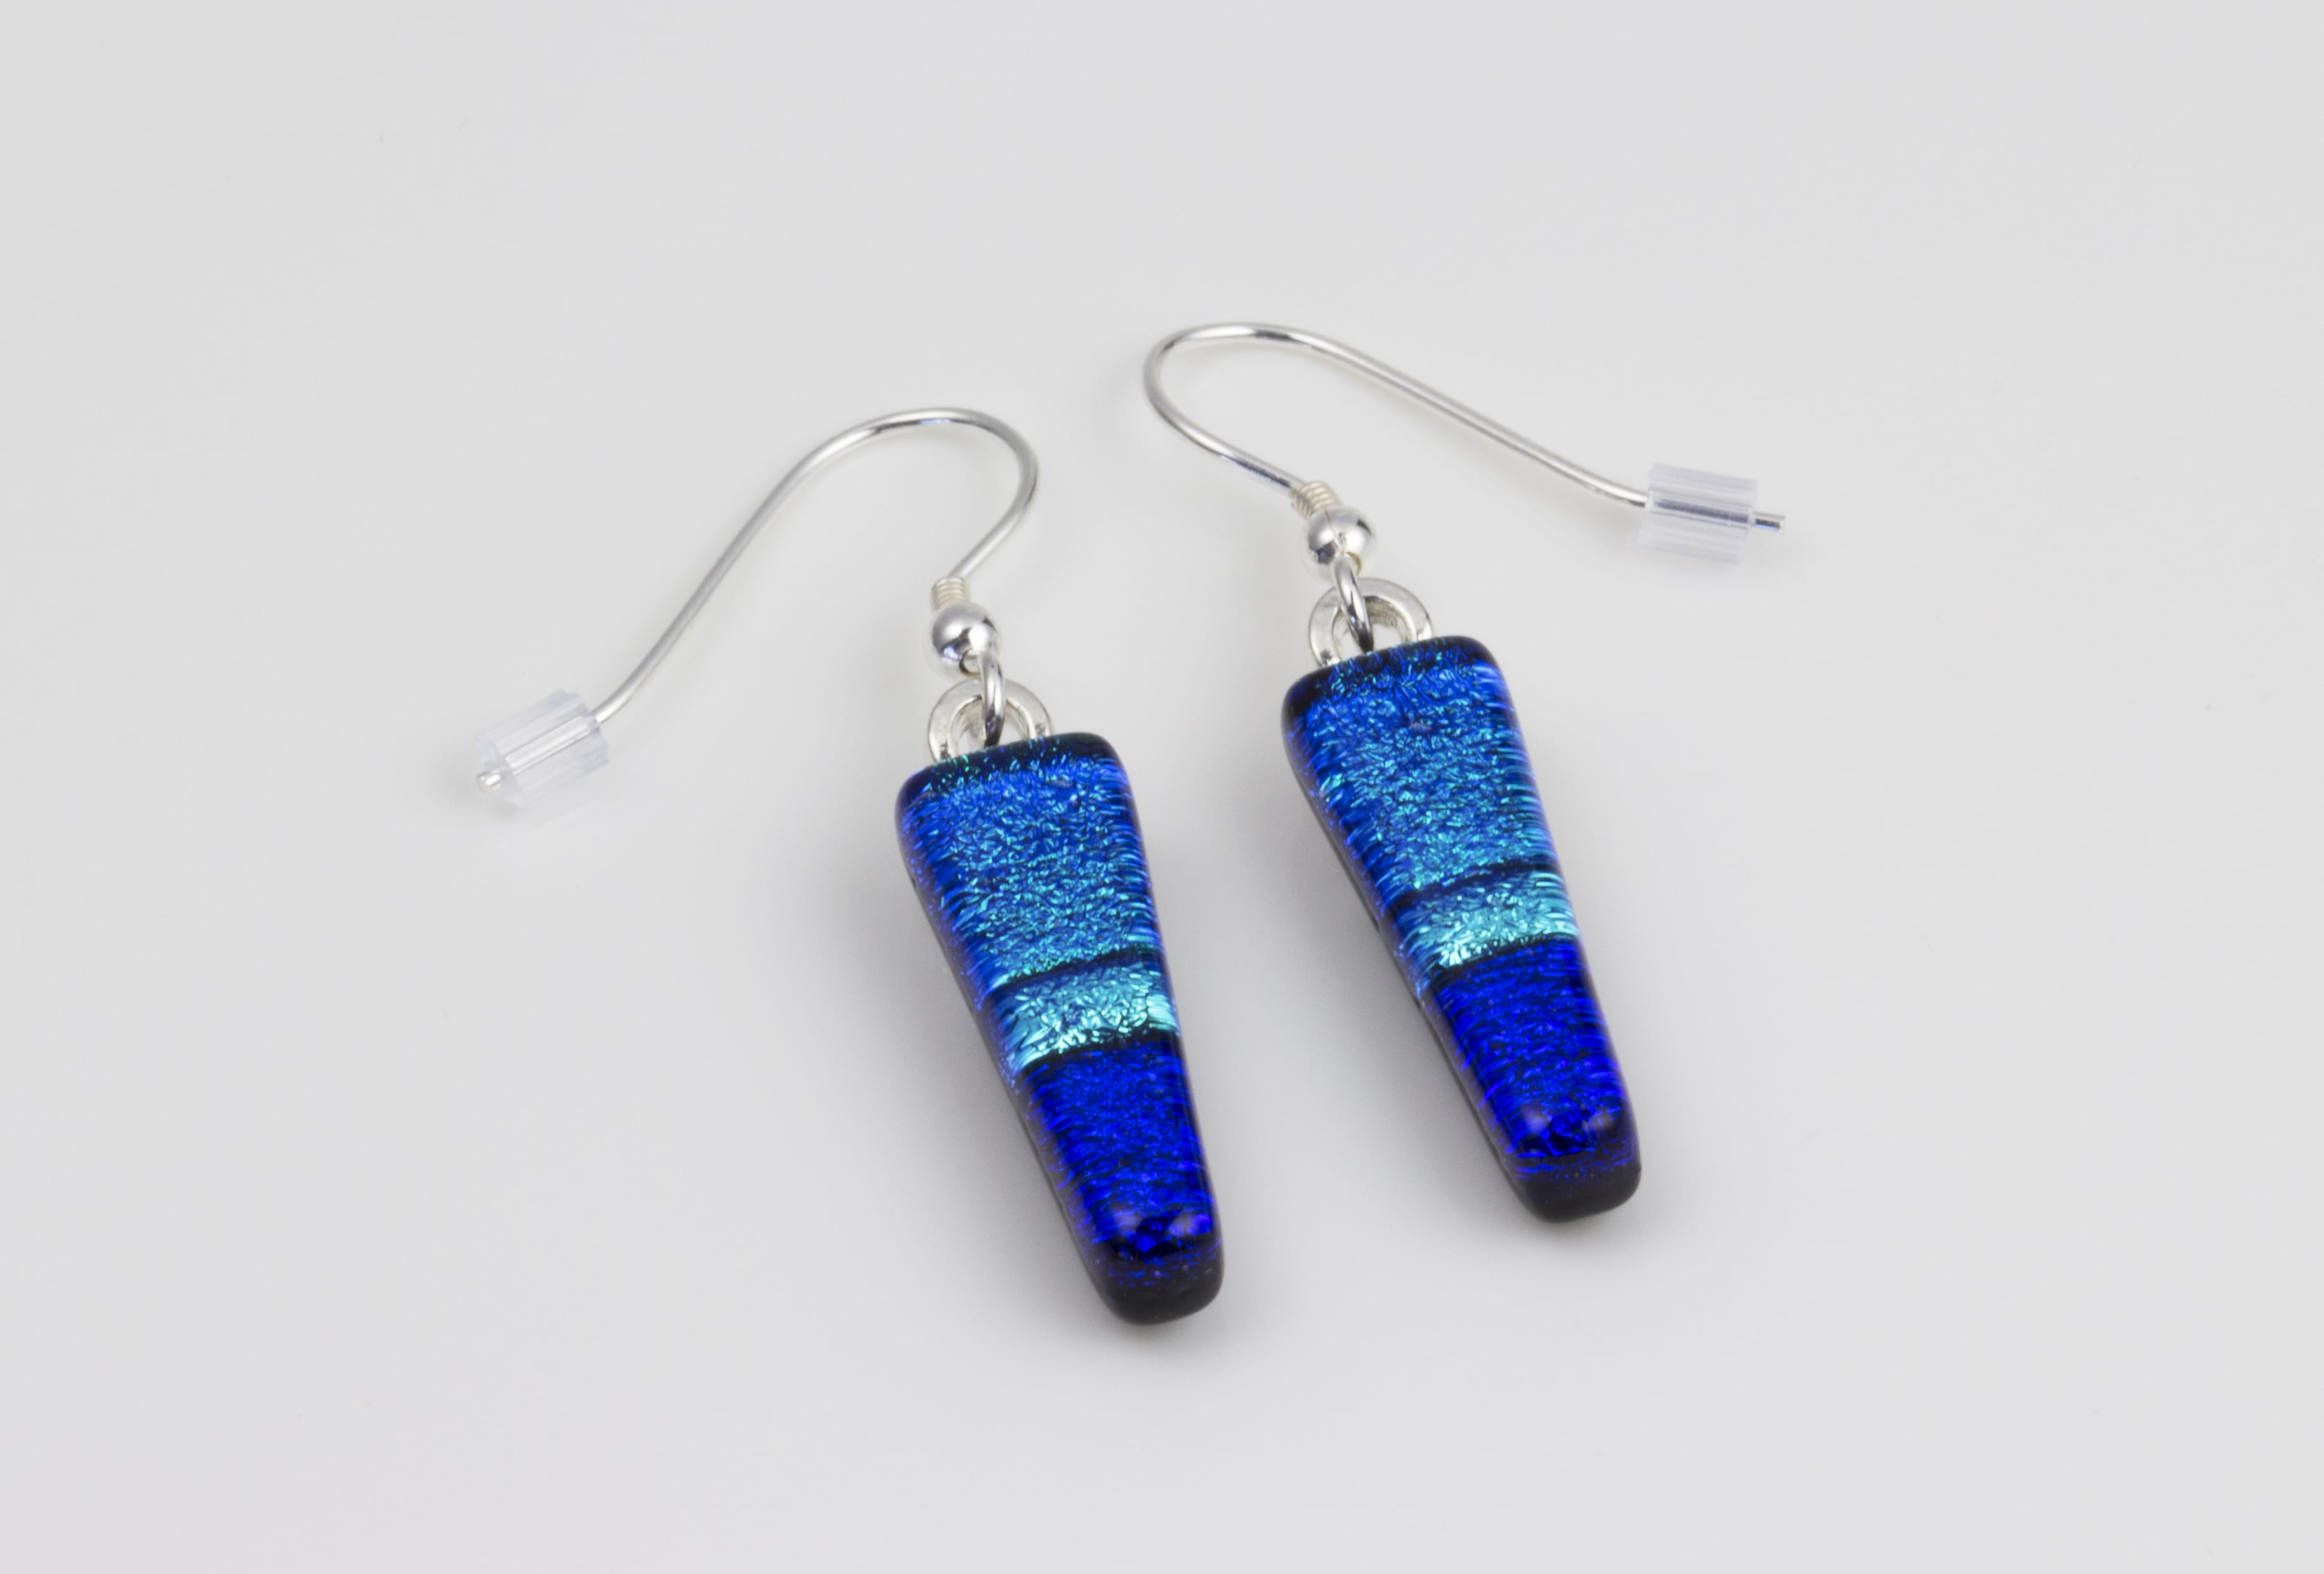 Dichroic glass jewellery drop earrings, tapered blue glass earrings in 3 tones of blue, art glass earrings handmade in Shropshire, sterling silver hooks